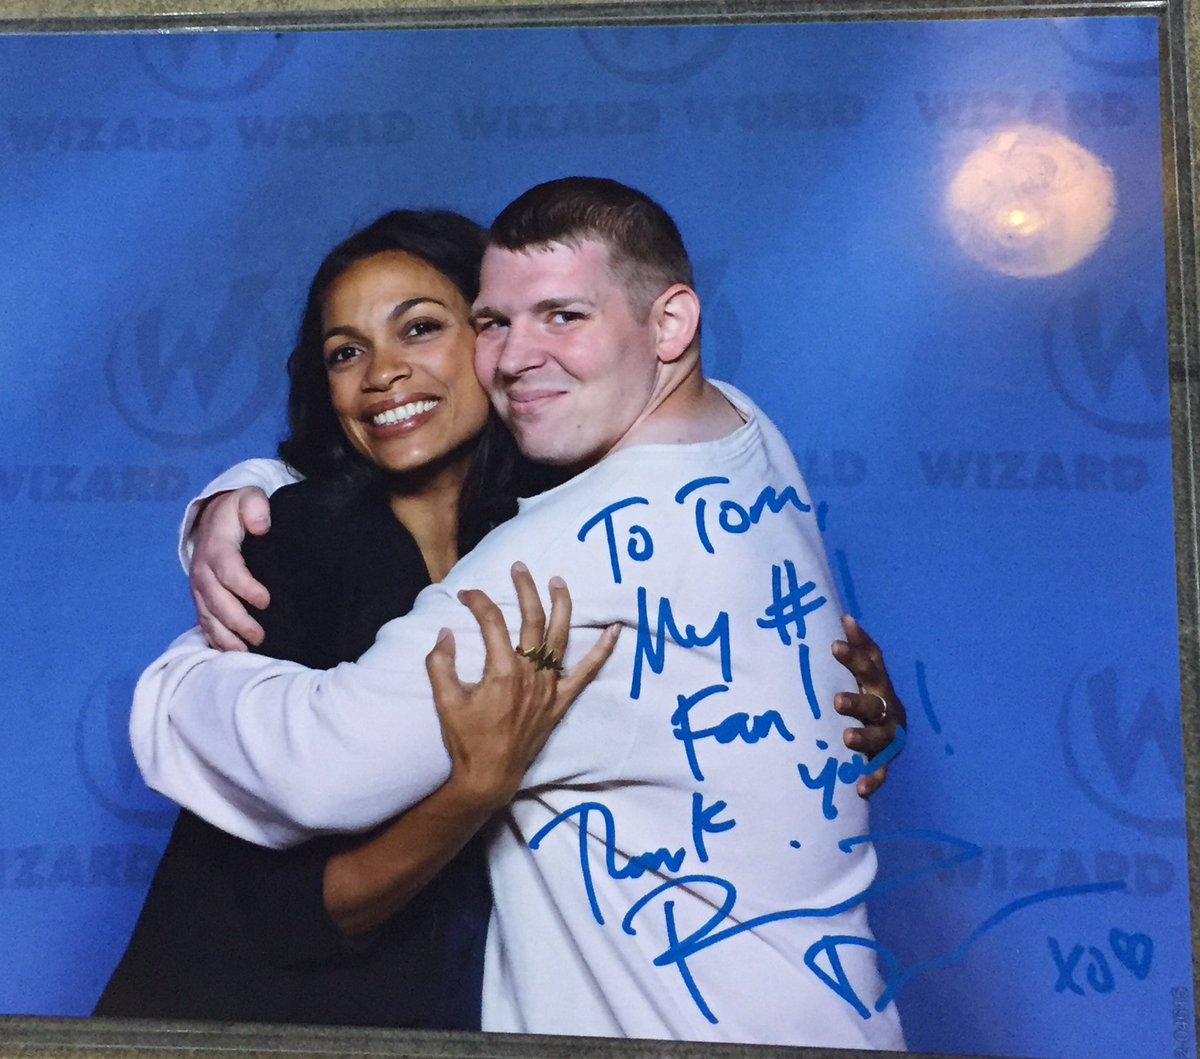 RT @gilmartin_tom: I got to meet my favorite actress @rosariodawson she is so awesome ???????????? #WizardWorldChicago https://t.co/YcBEGm5X2r